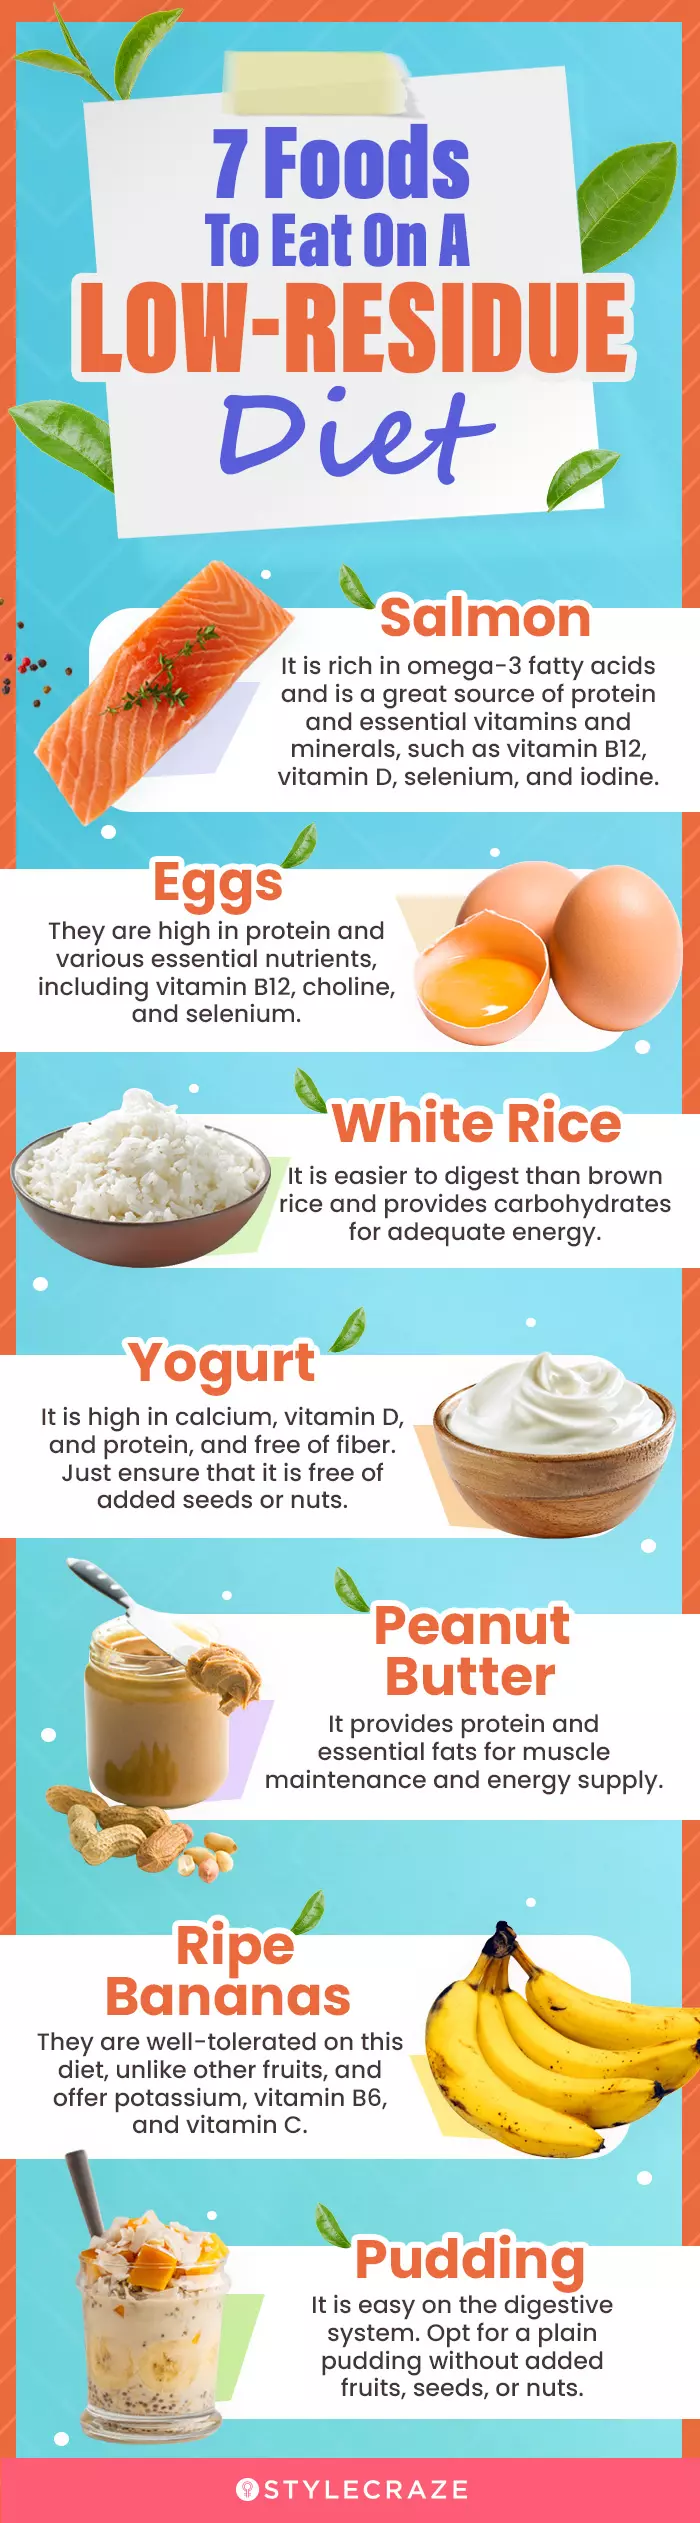 7 foods to eat on a low residue diet (infographic)